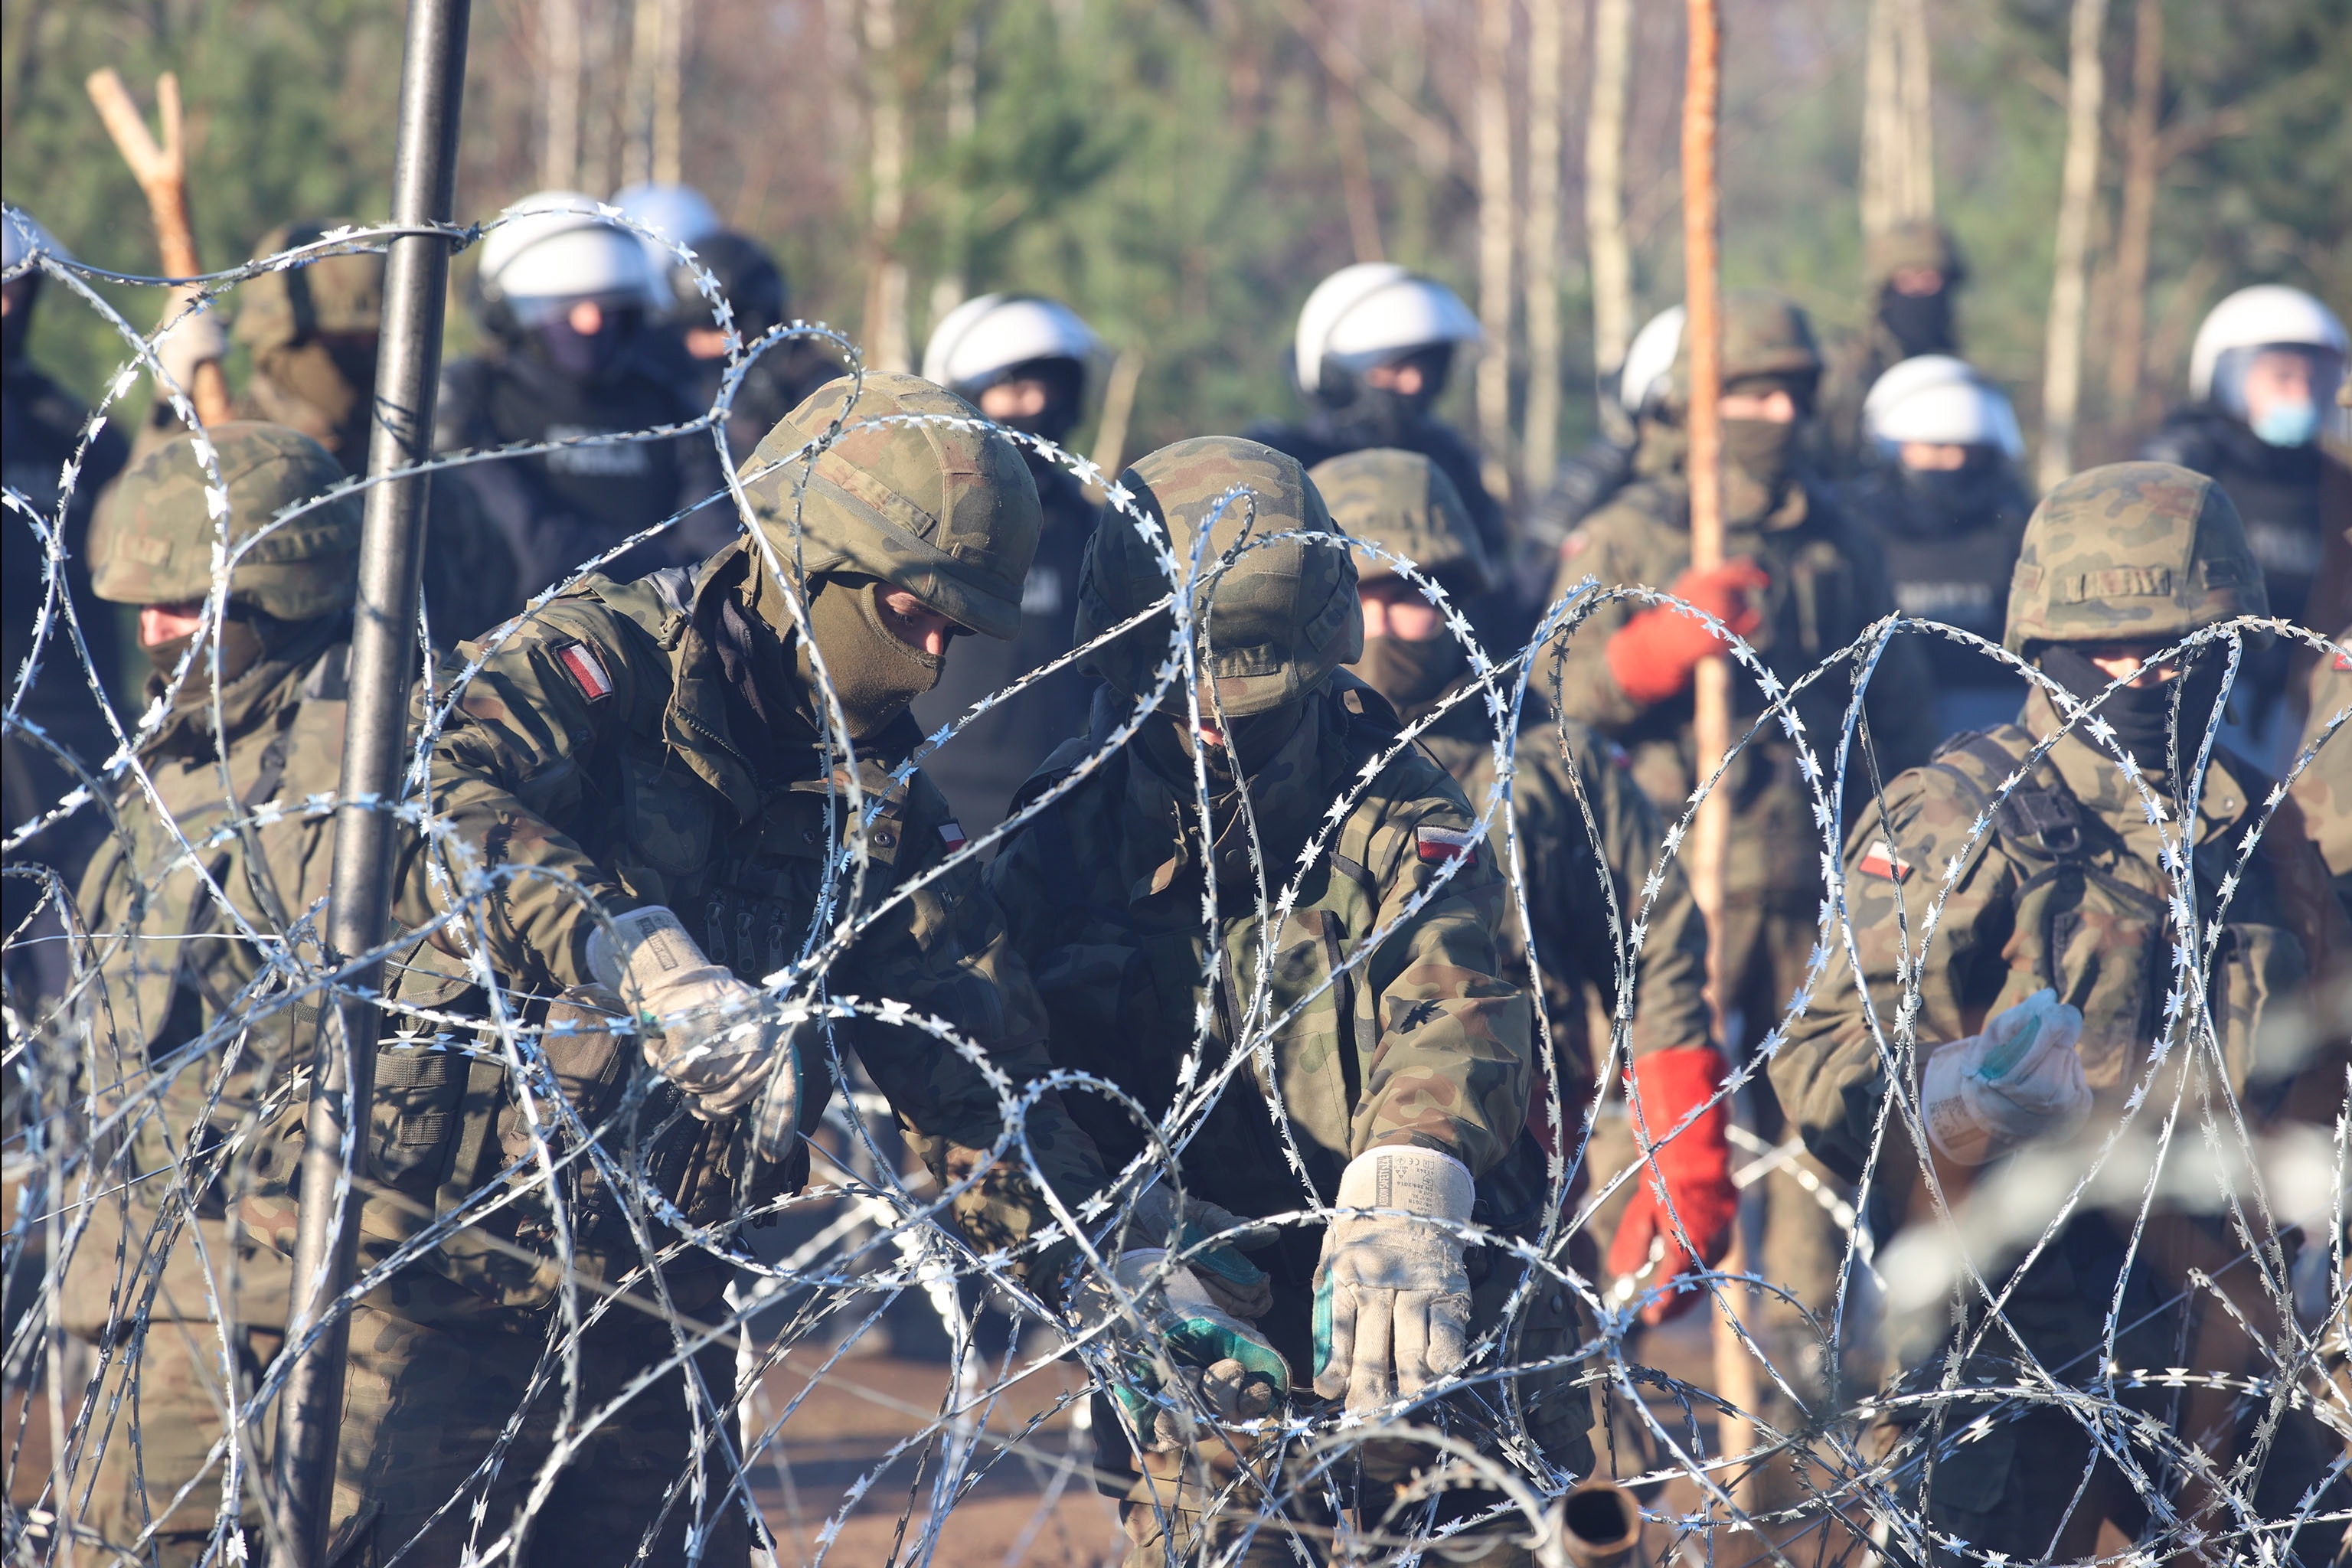 A handout picture shows Polish servicemen reinforcing the border line with barbed wire